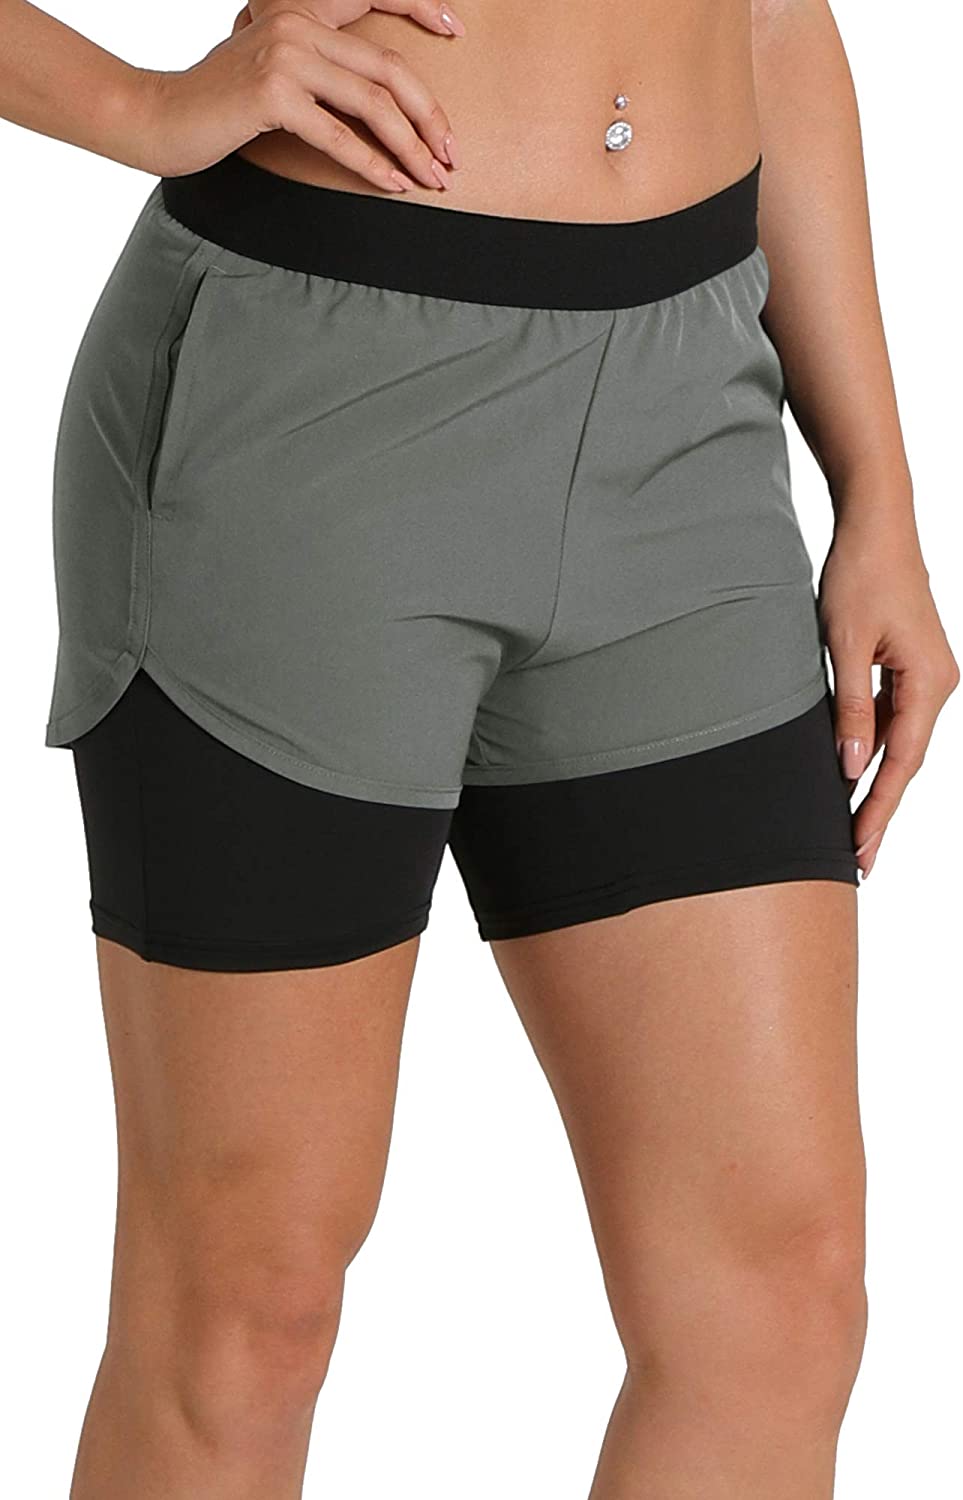 Gym Yoga Exercise Athletic Shorts with Pockets icyzone Running Workout Shorts for Women